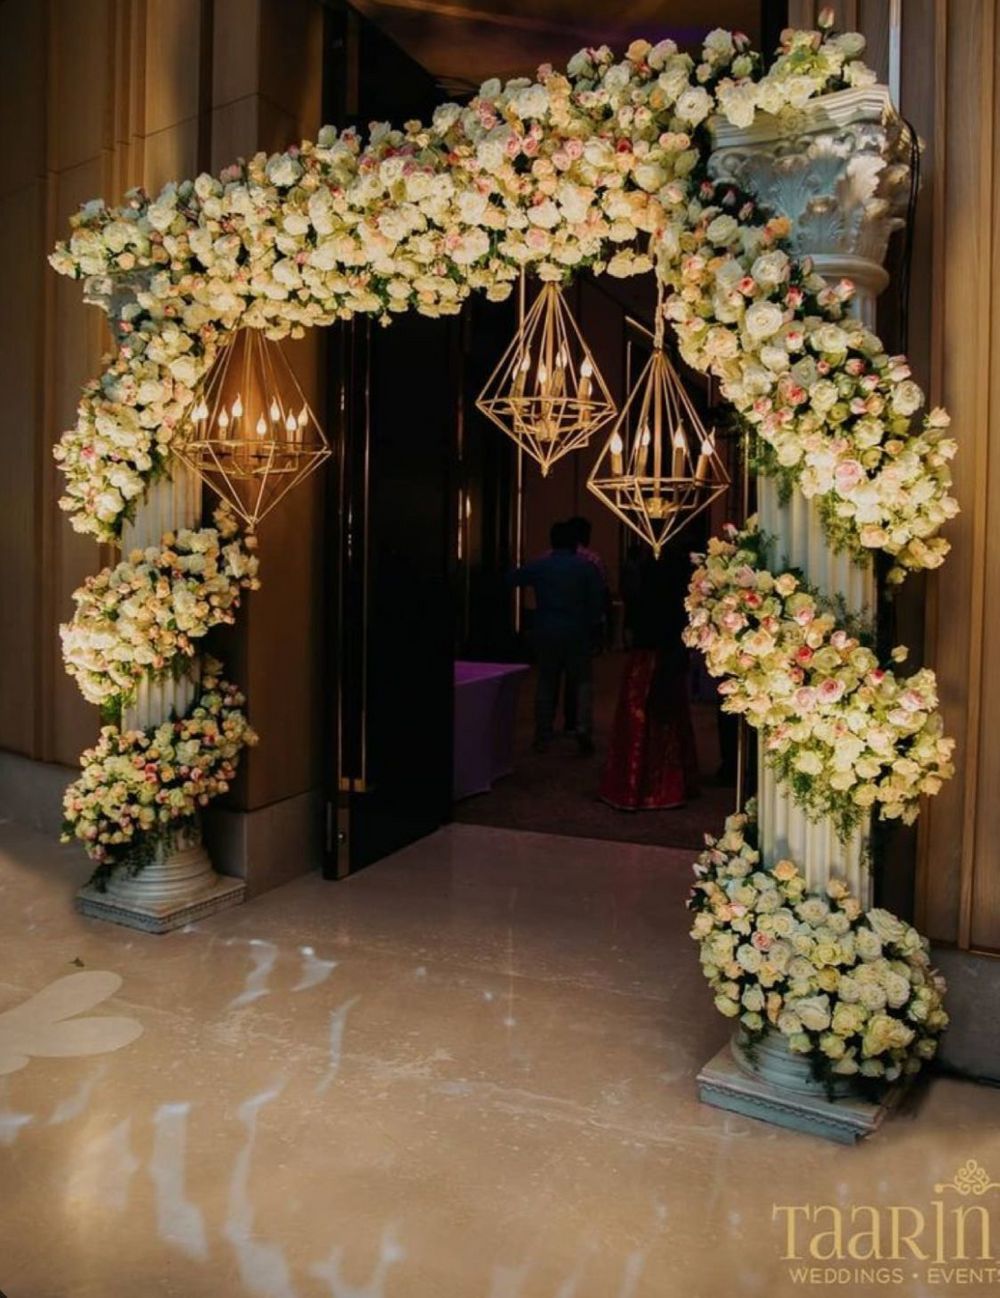 Photo From Wedding Decorator Ahmedabad - By SK Corporation